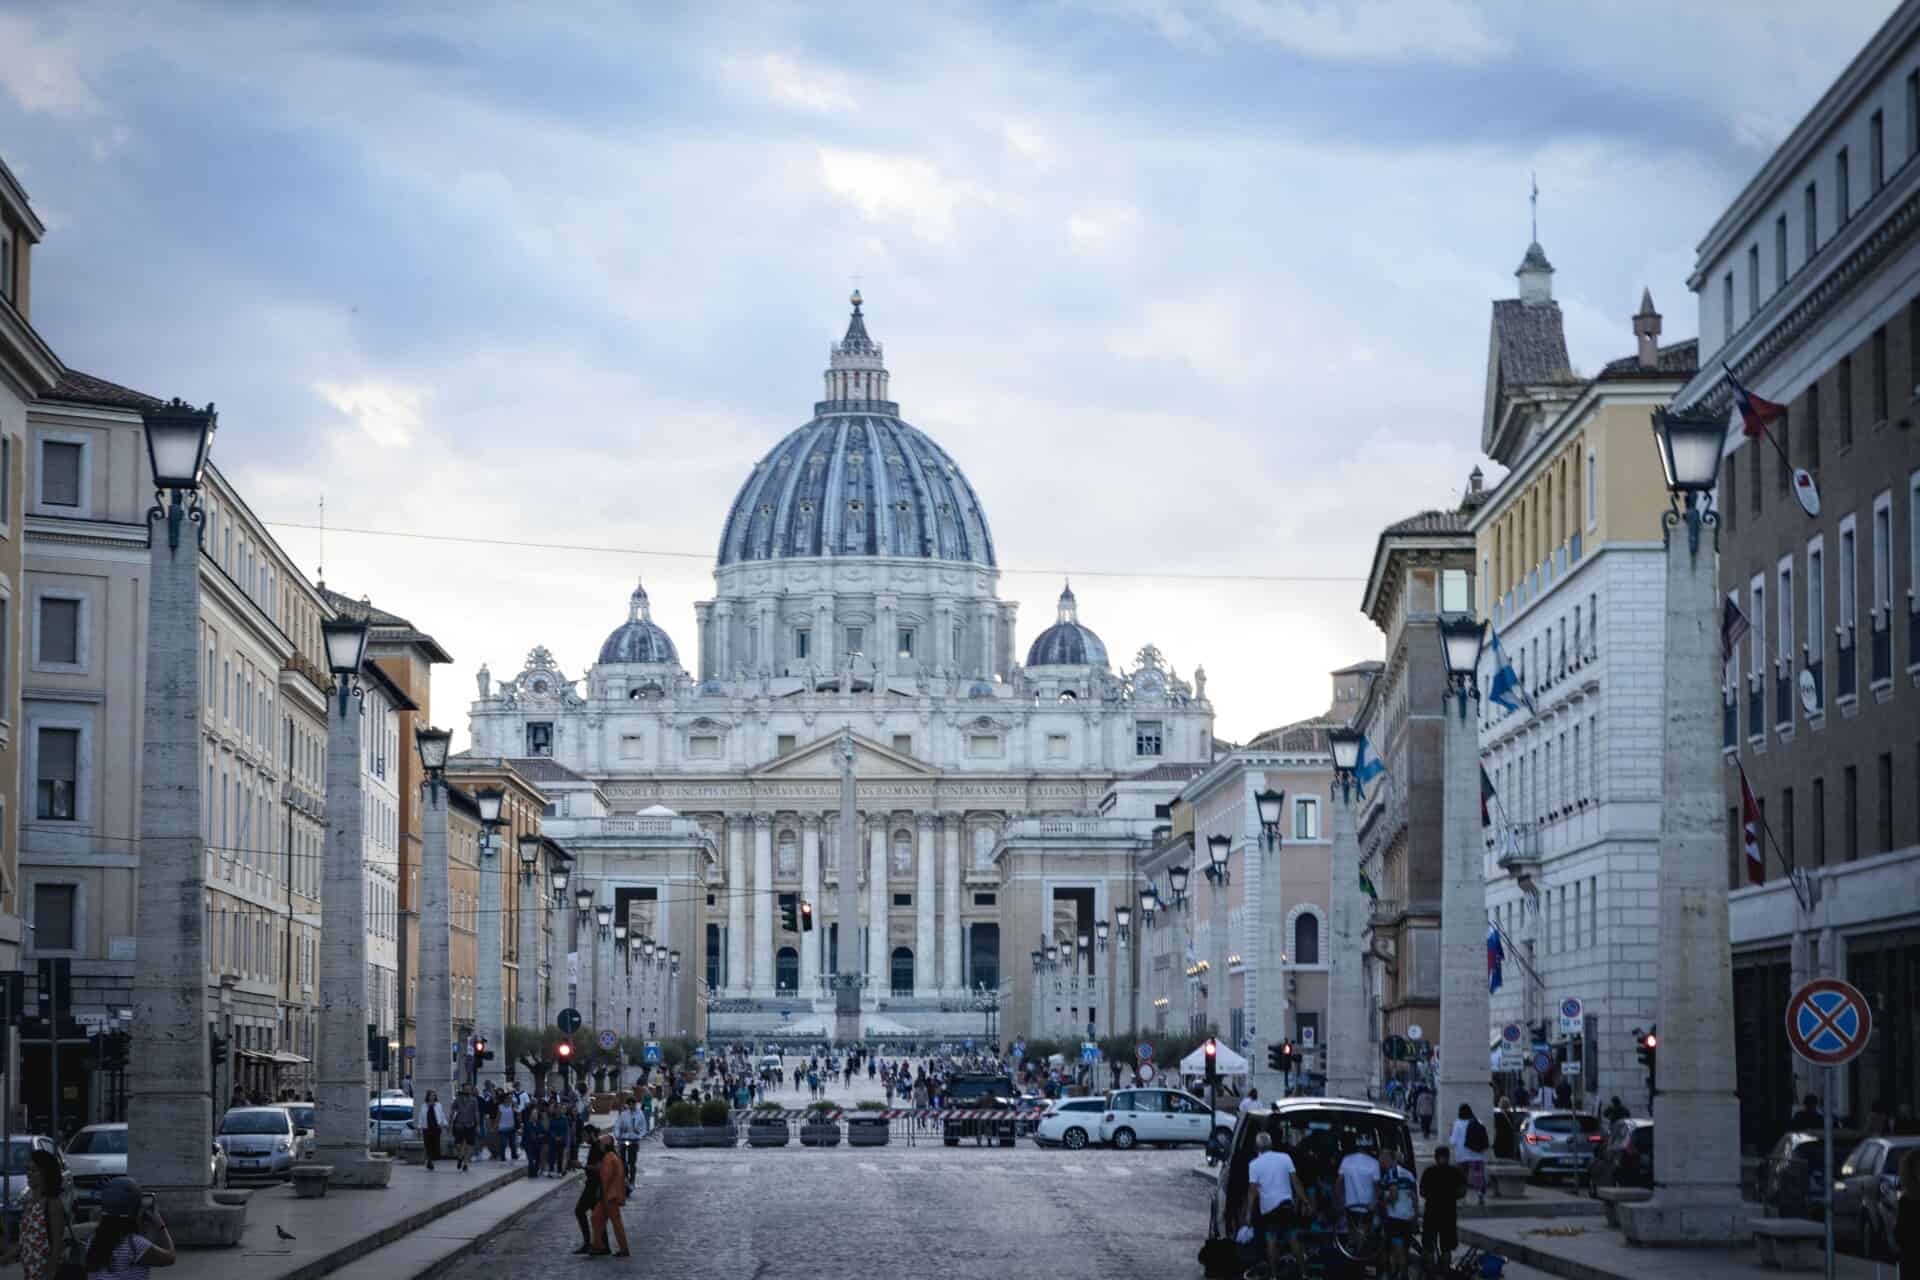 A view of St. Peter's Basilica in Rome, Italy